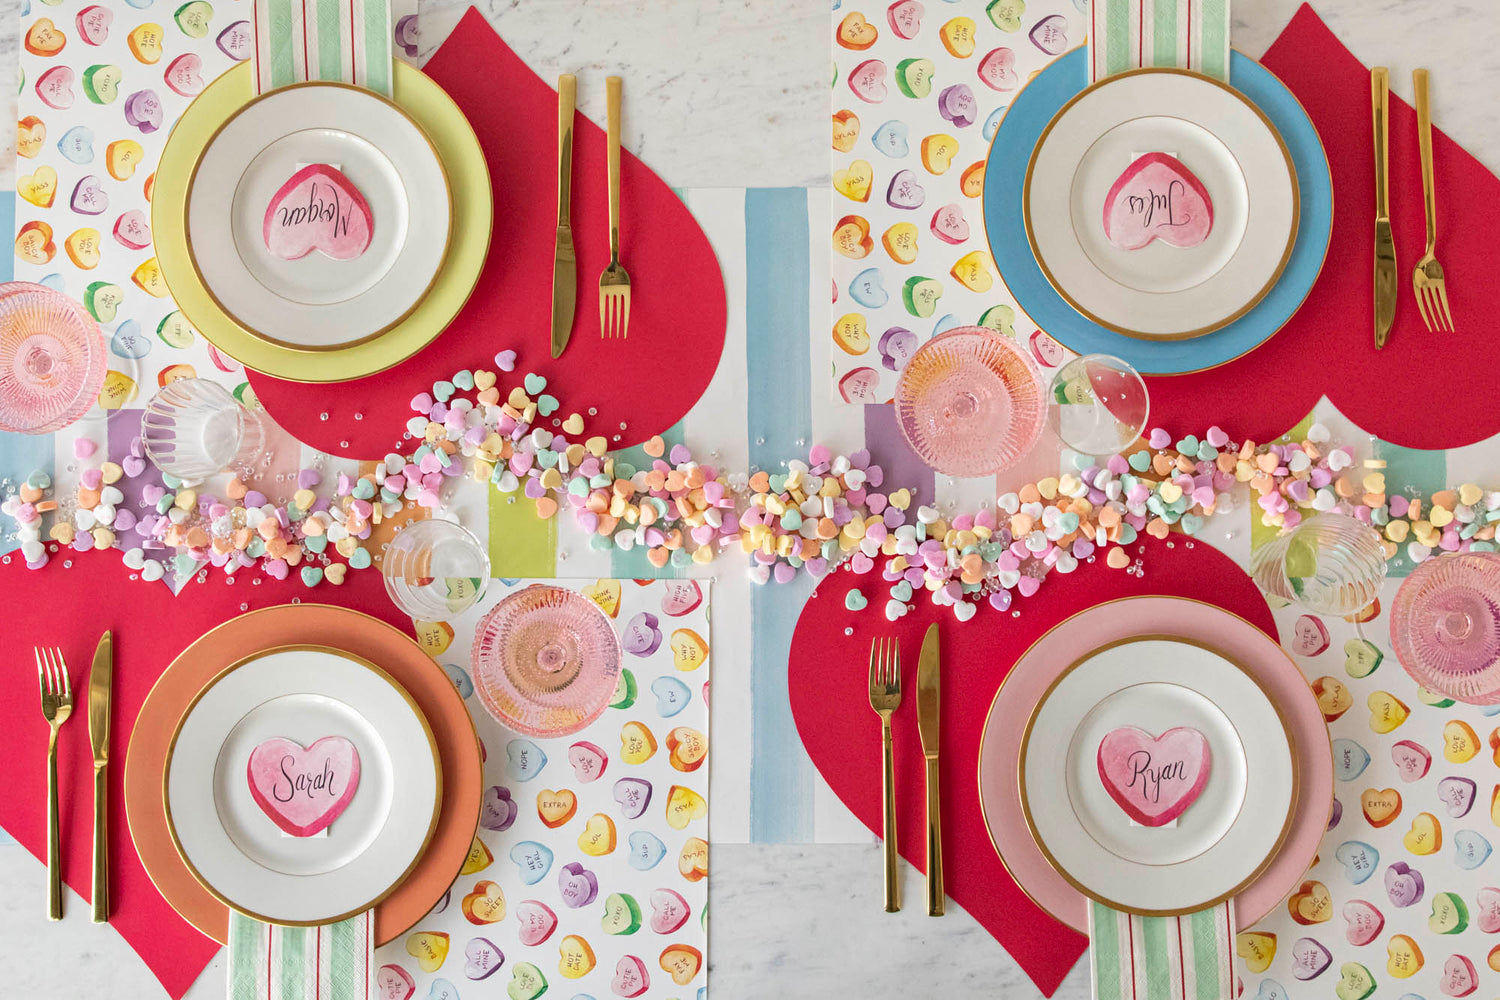 The Die-cut Red Heart Placemat under a colorful Valentine&